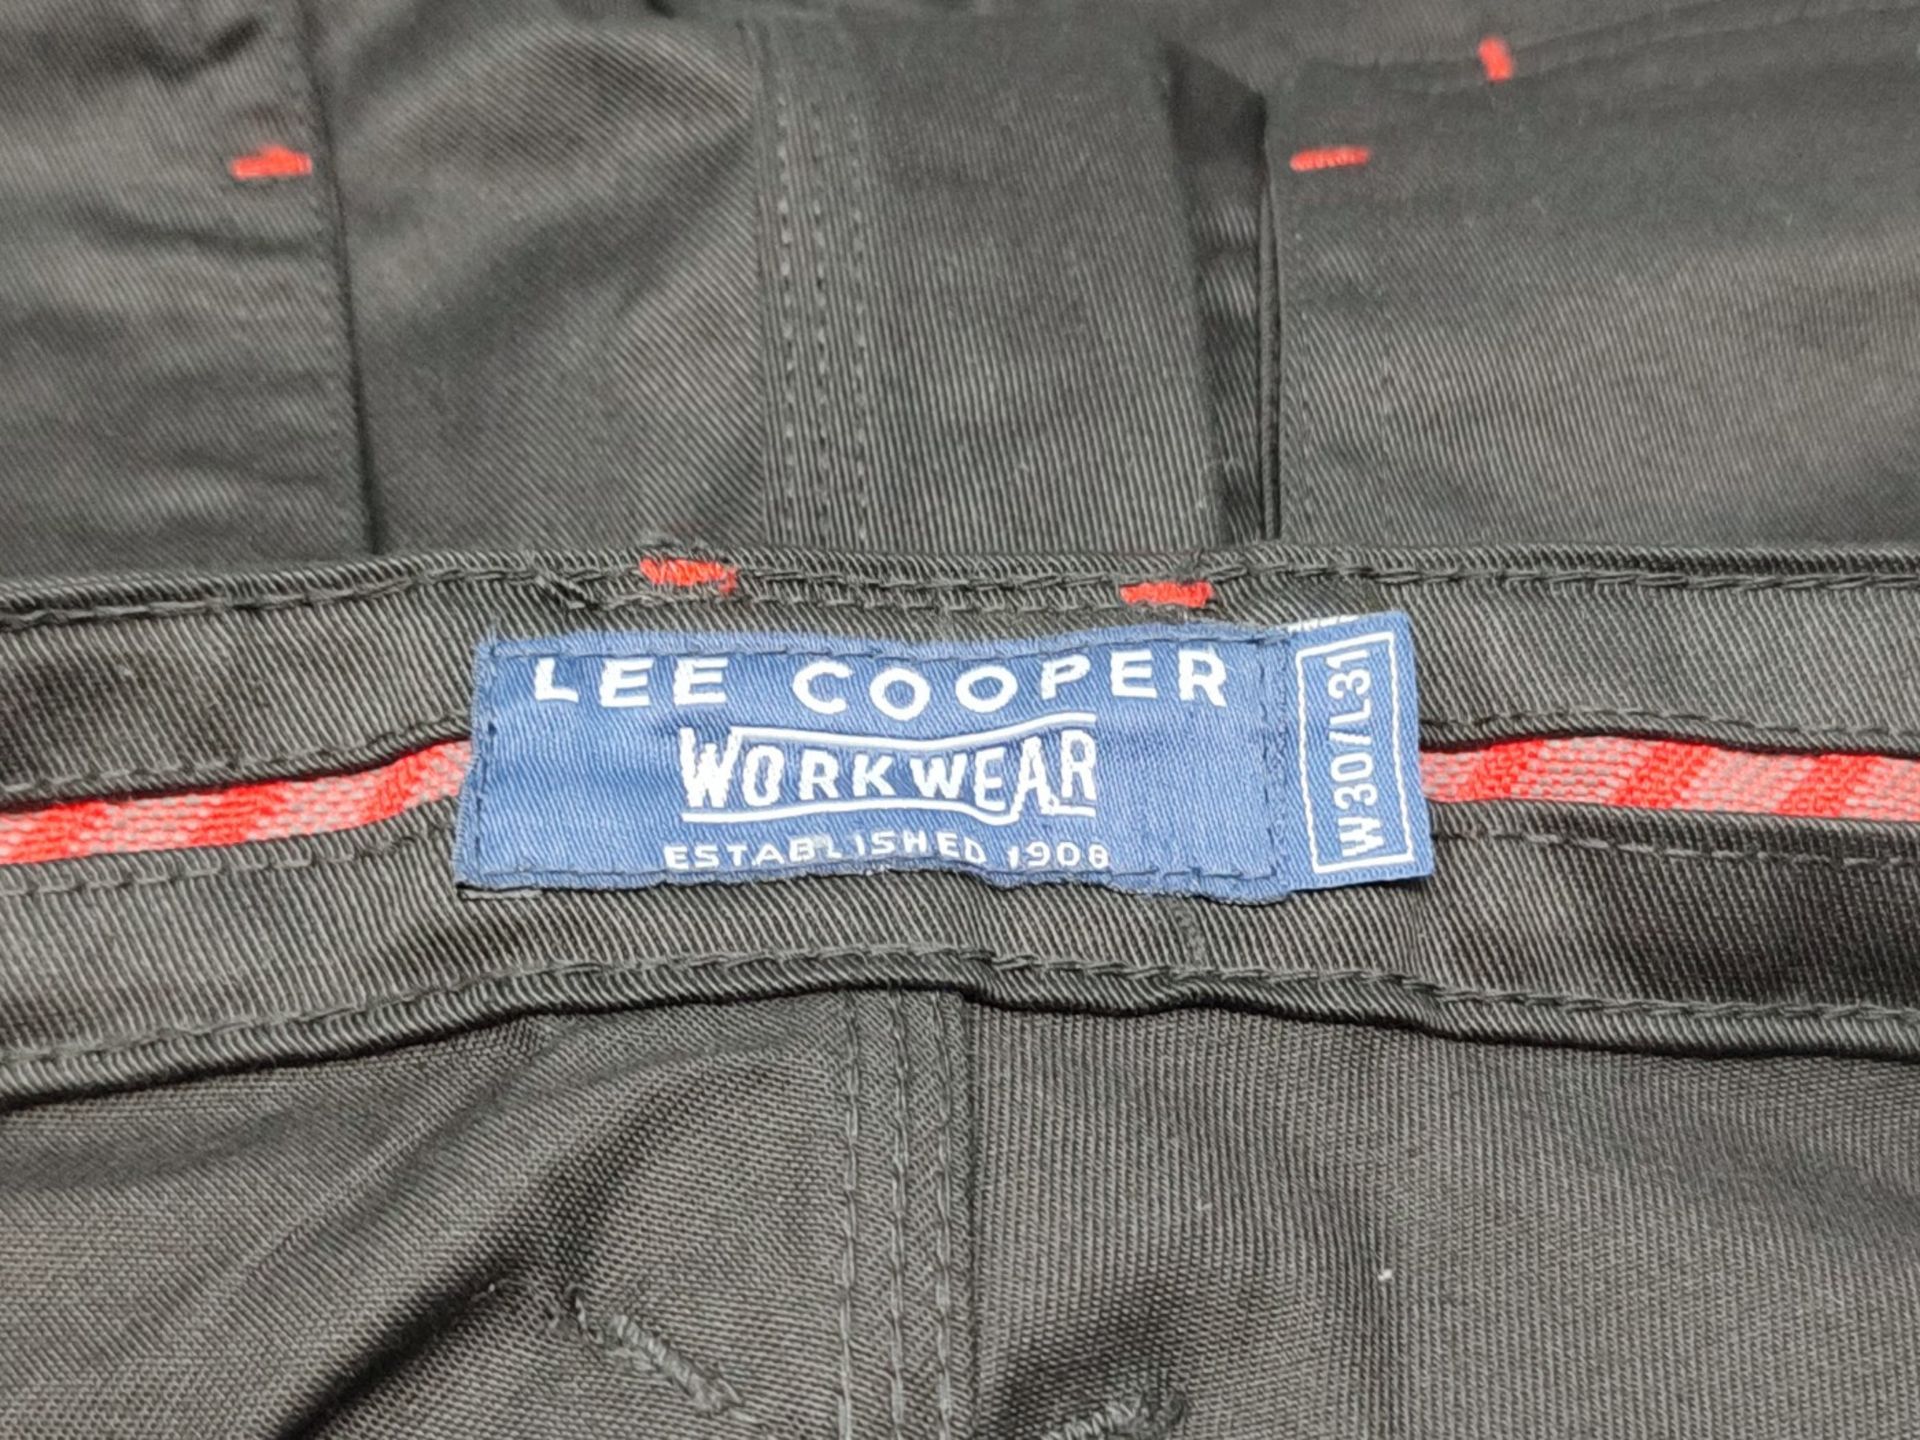 Lee Cooper Workwear Mens Multi Pocket Easy Care Heavy Duty Knee Pad Pockets Safety Wor - Image 2 of 2